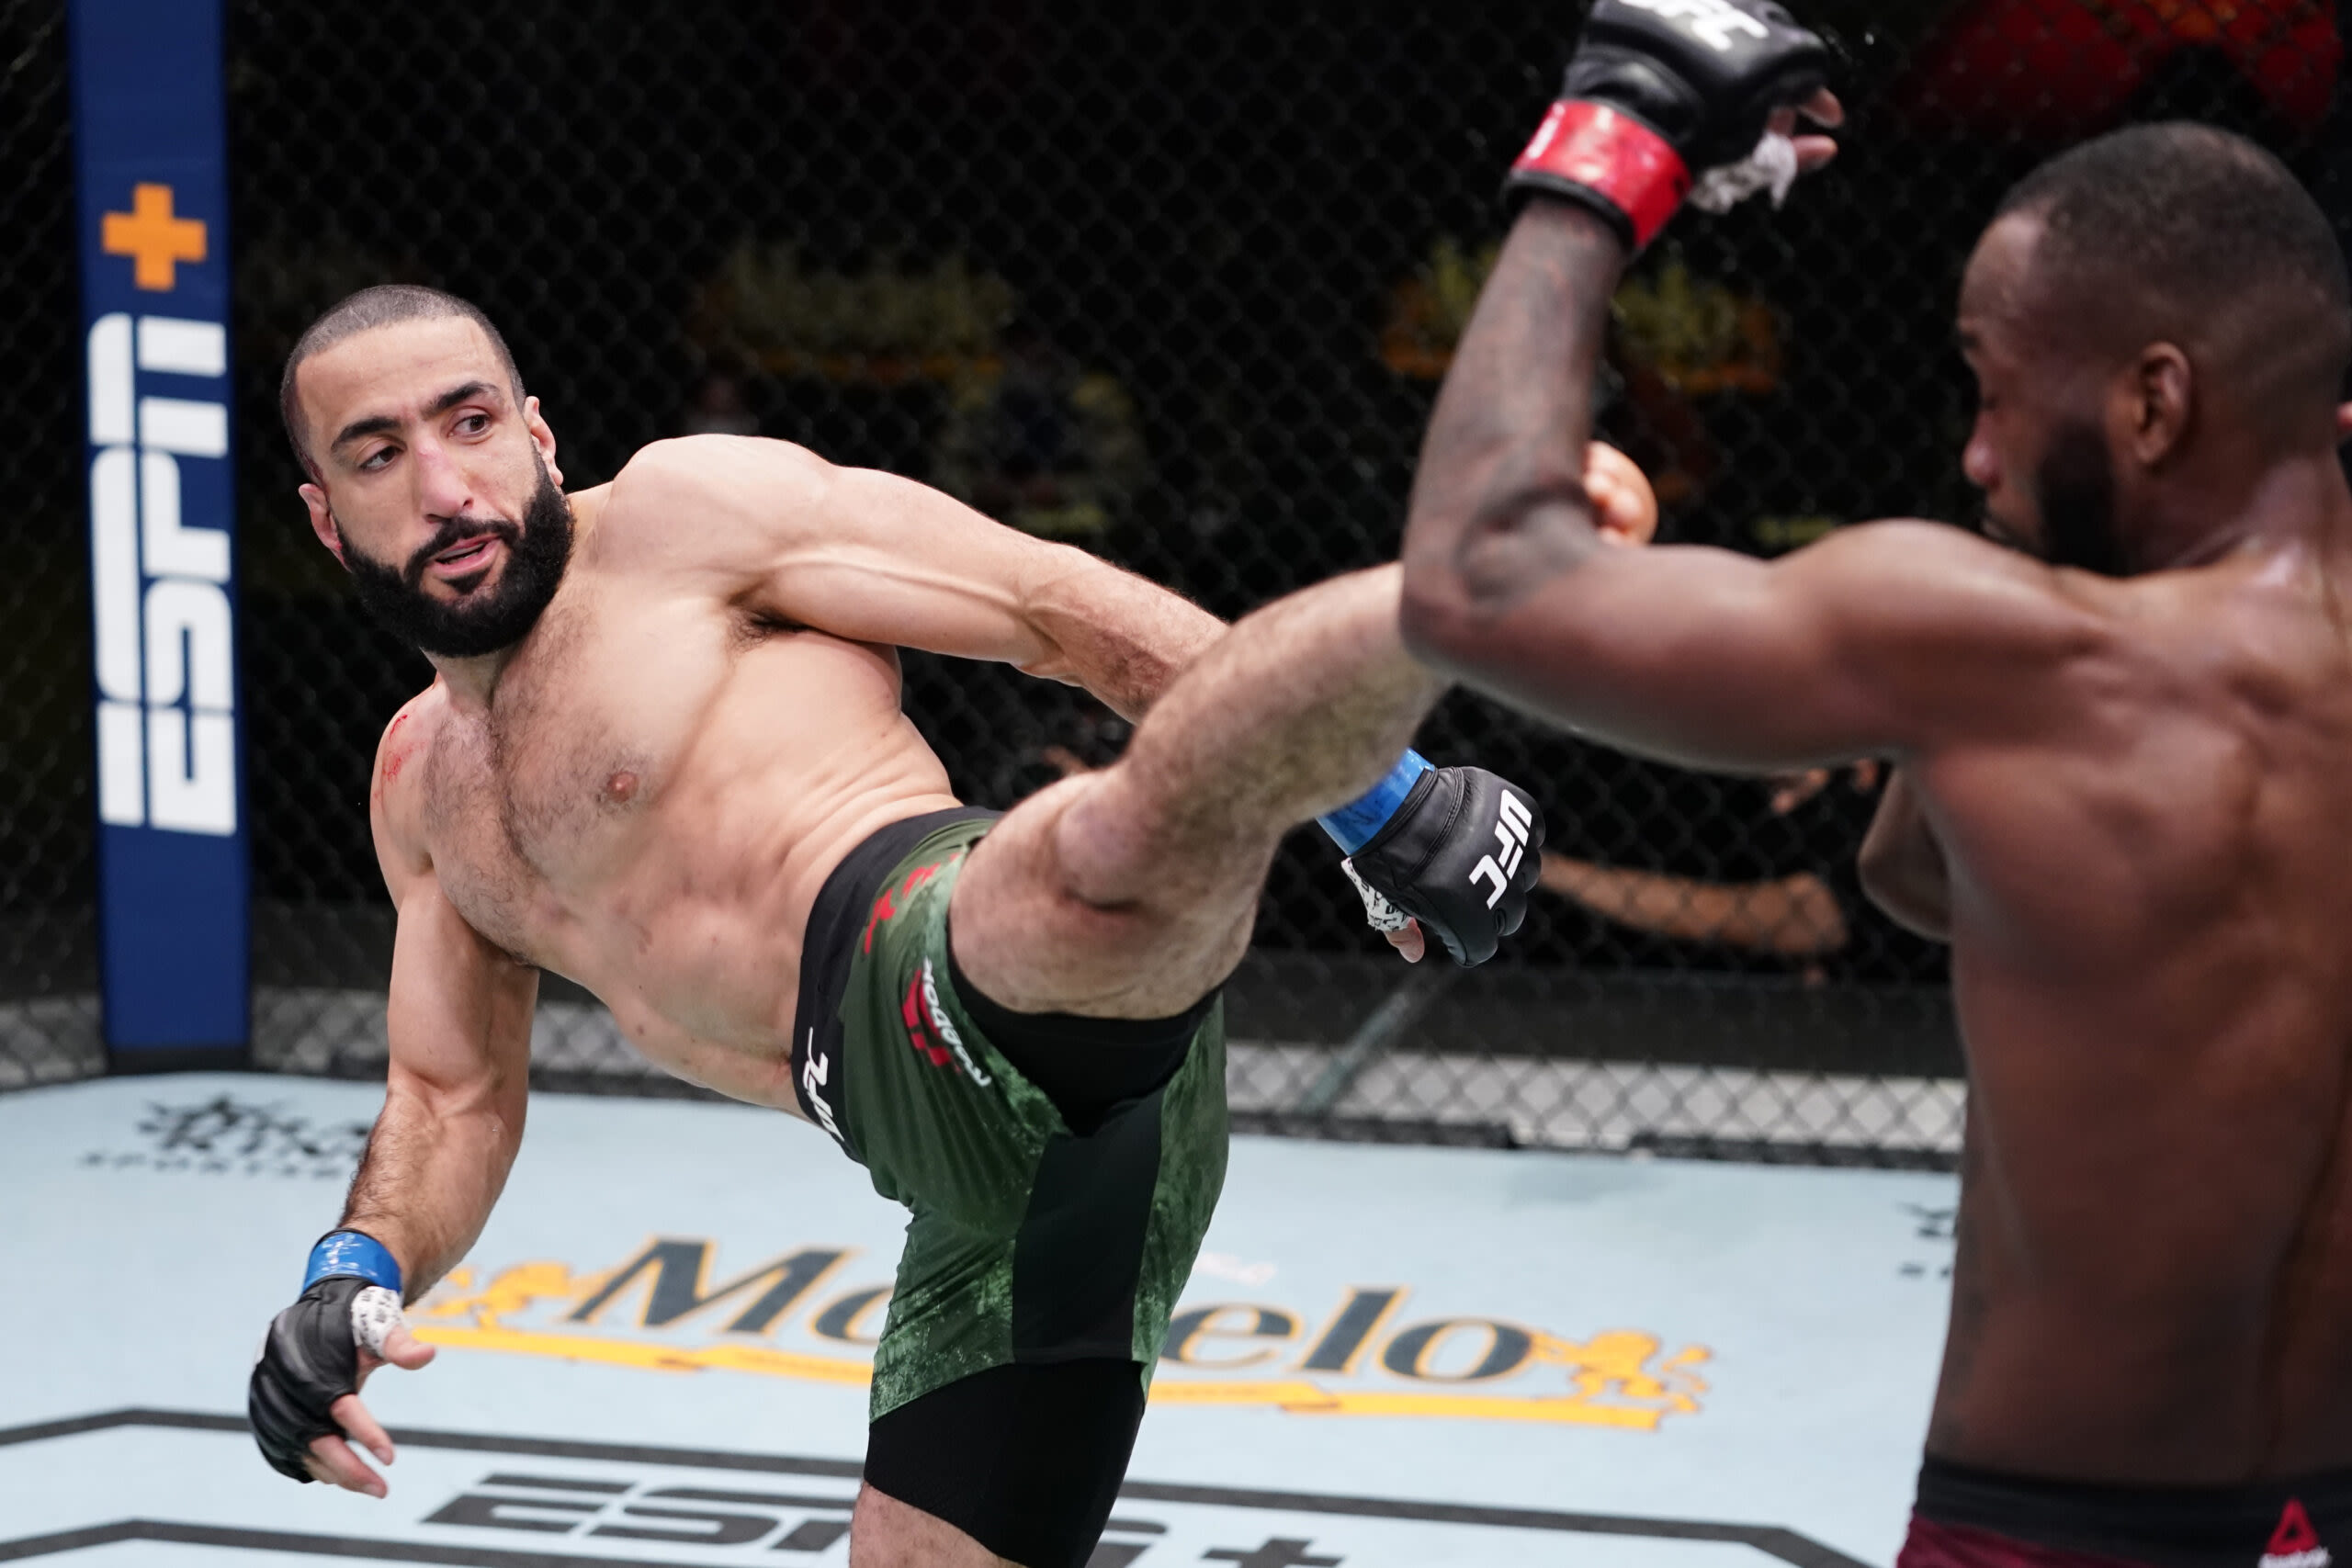 Belal Muhammad on fighting Leon Edwards overnight at UFC 304: ‘I’ll be awake to frigging punch him in his mouth’